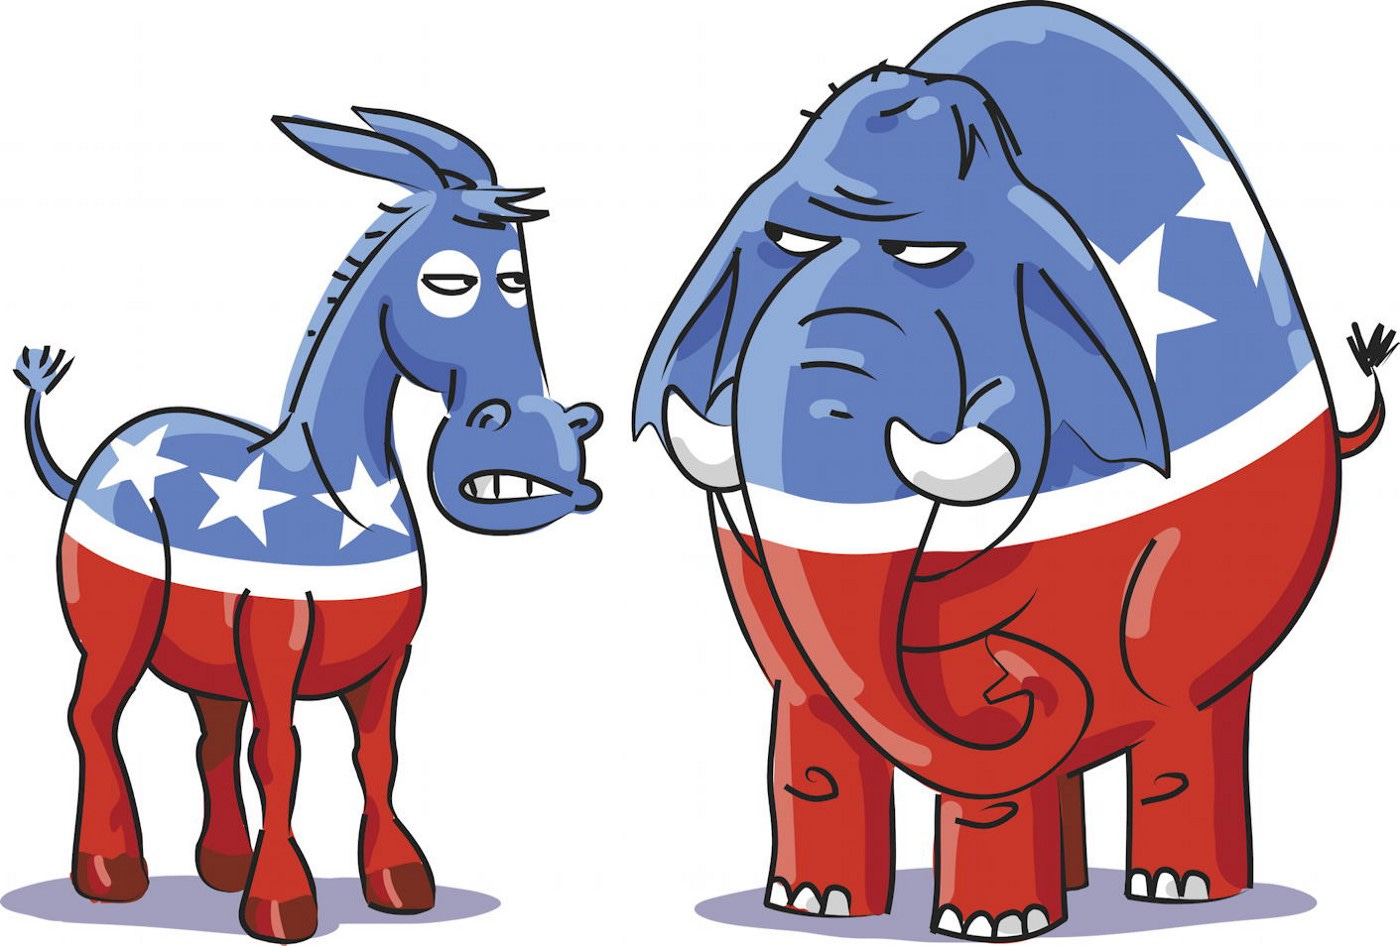 an angry Democratic donkey and Republican elephant looking at each other